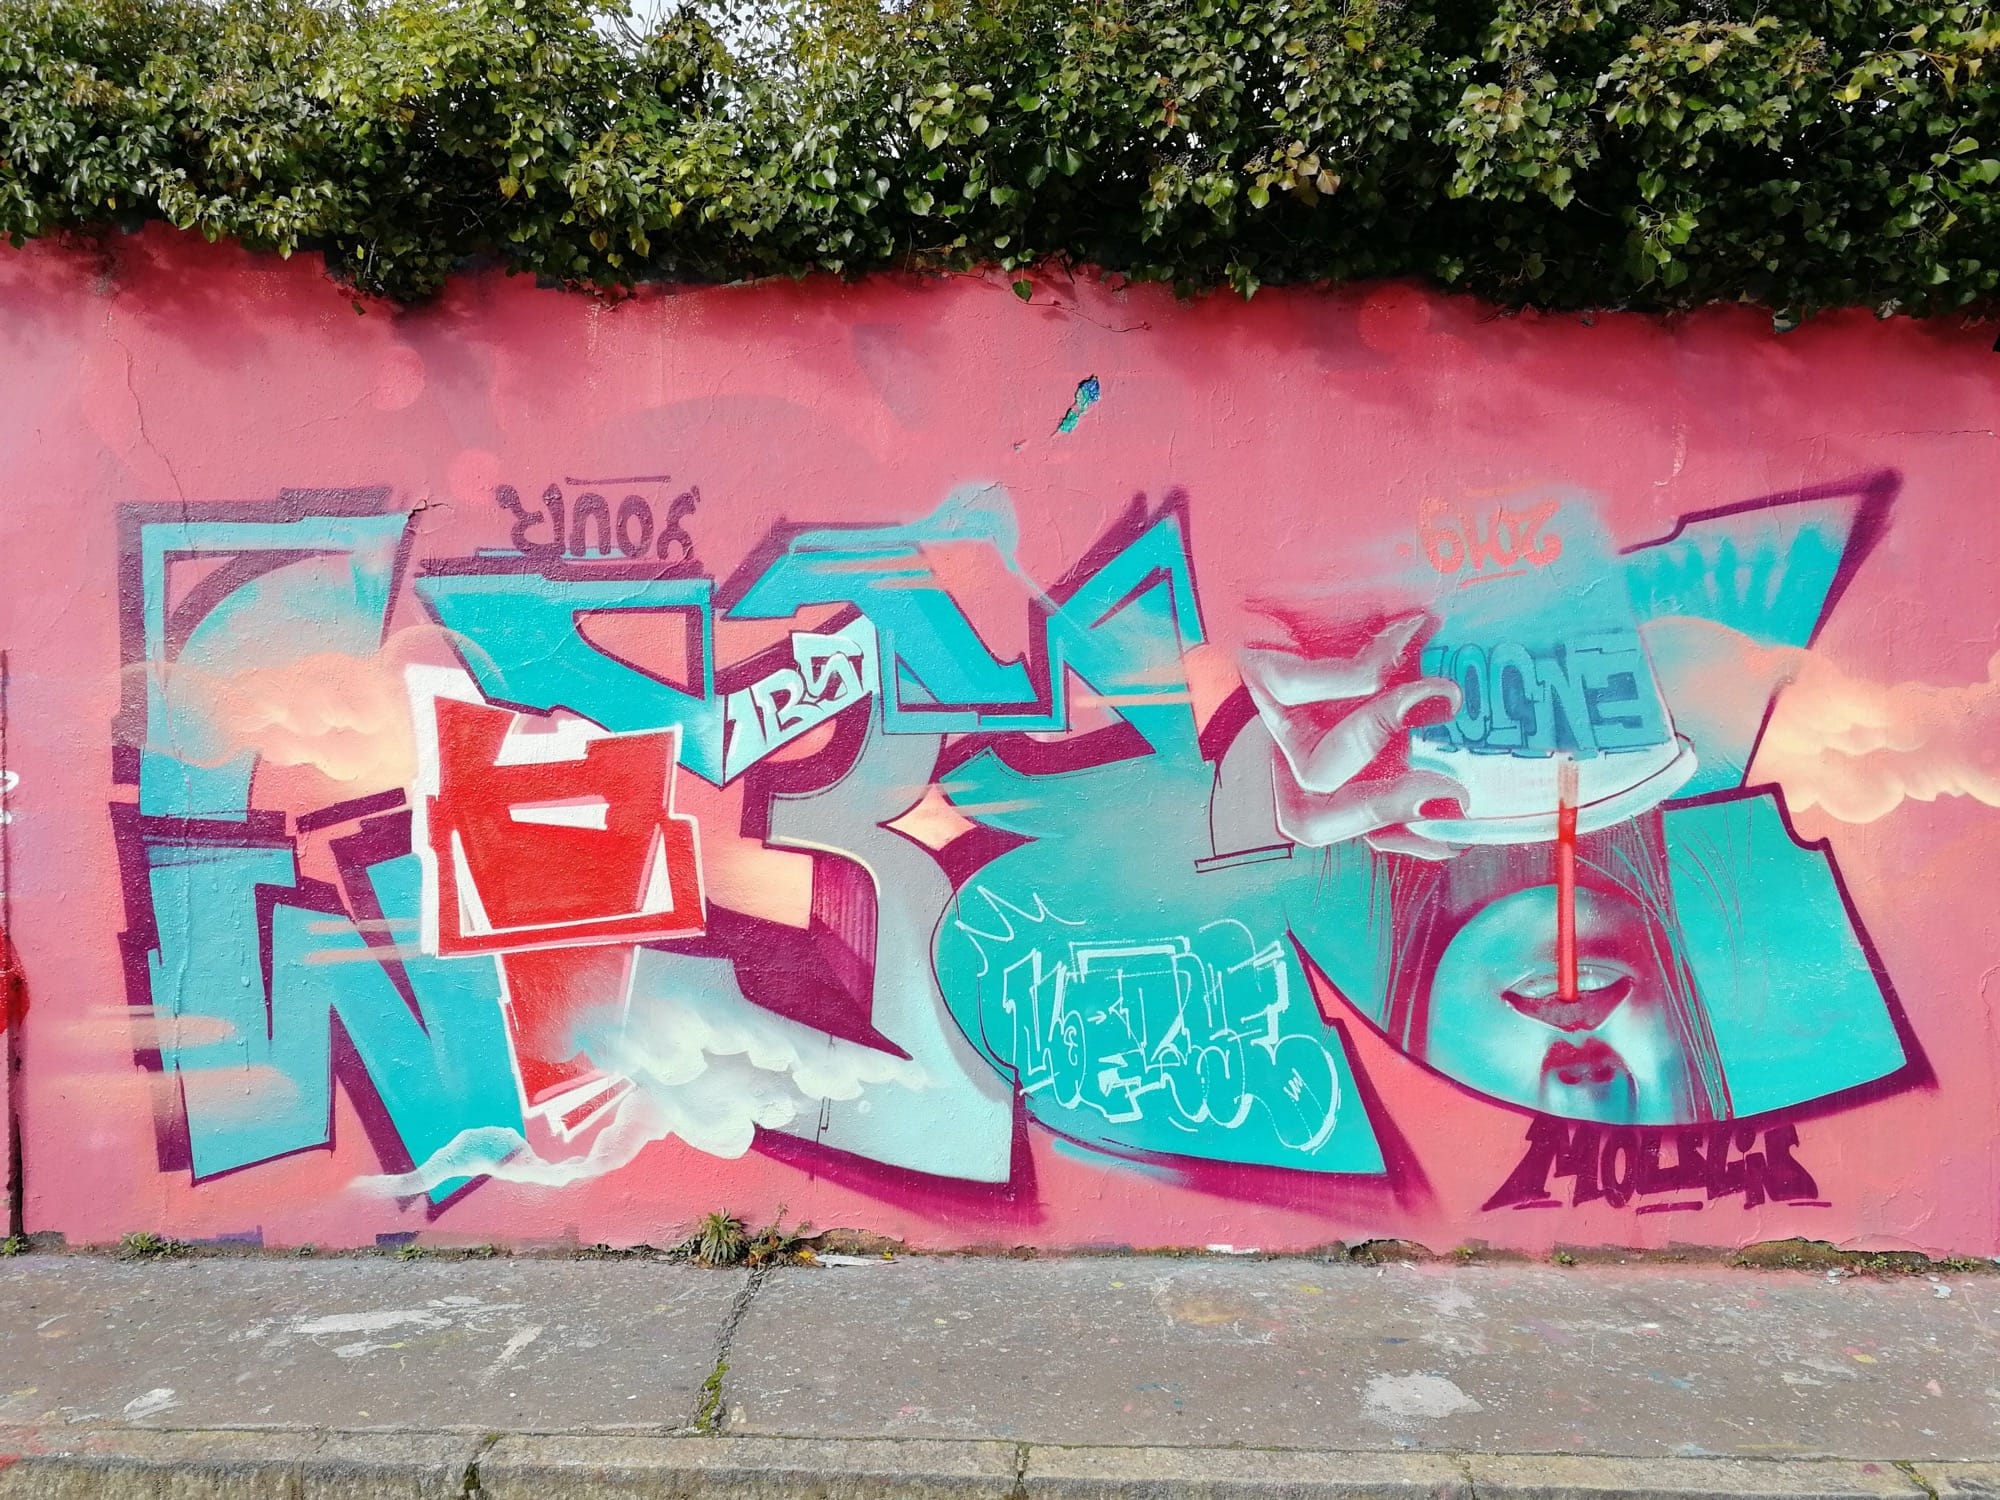 Graffiti 834  captured by Rabot in Nantes France